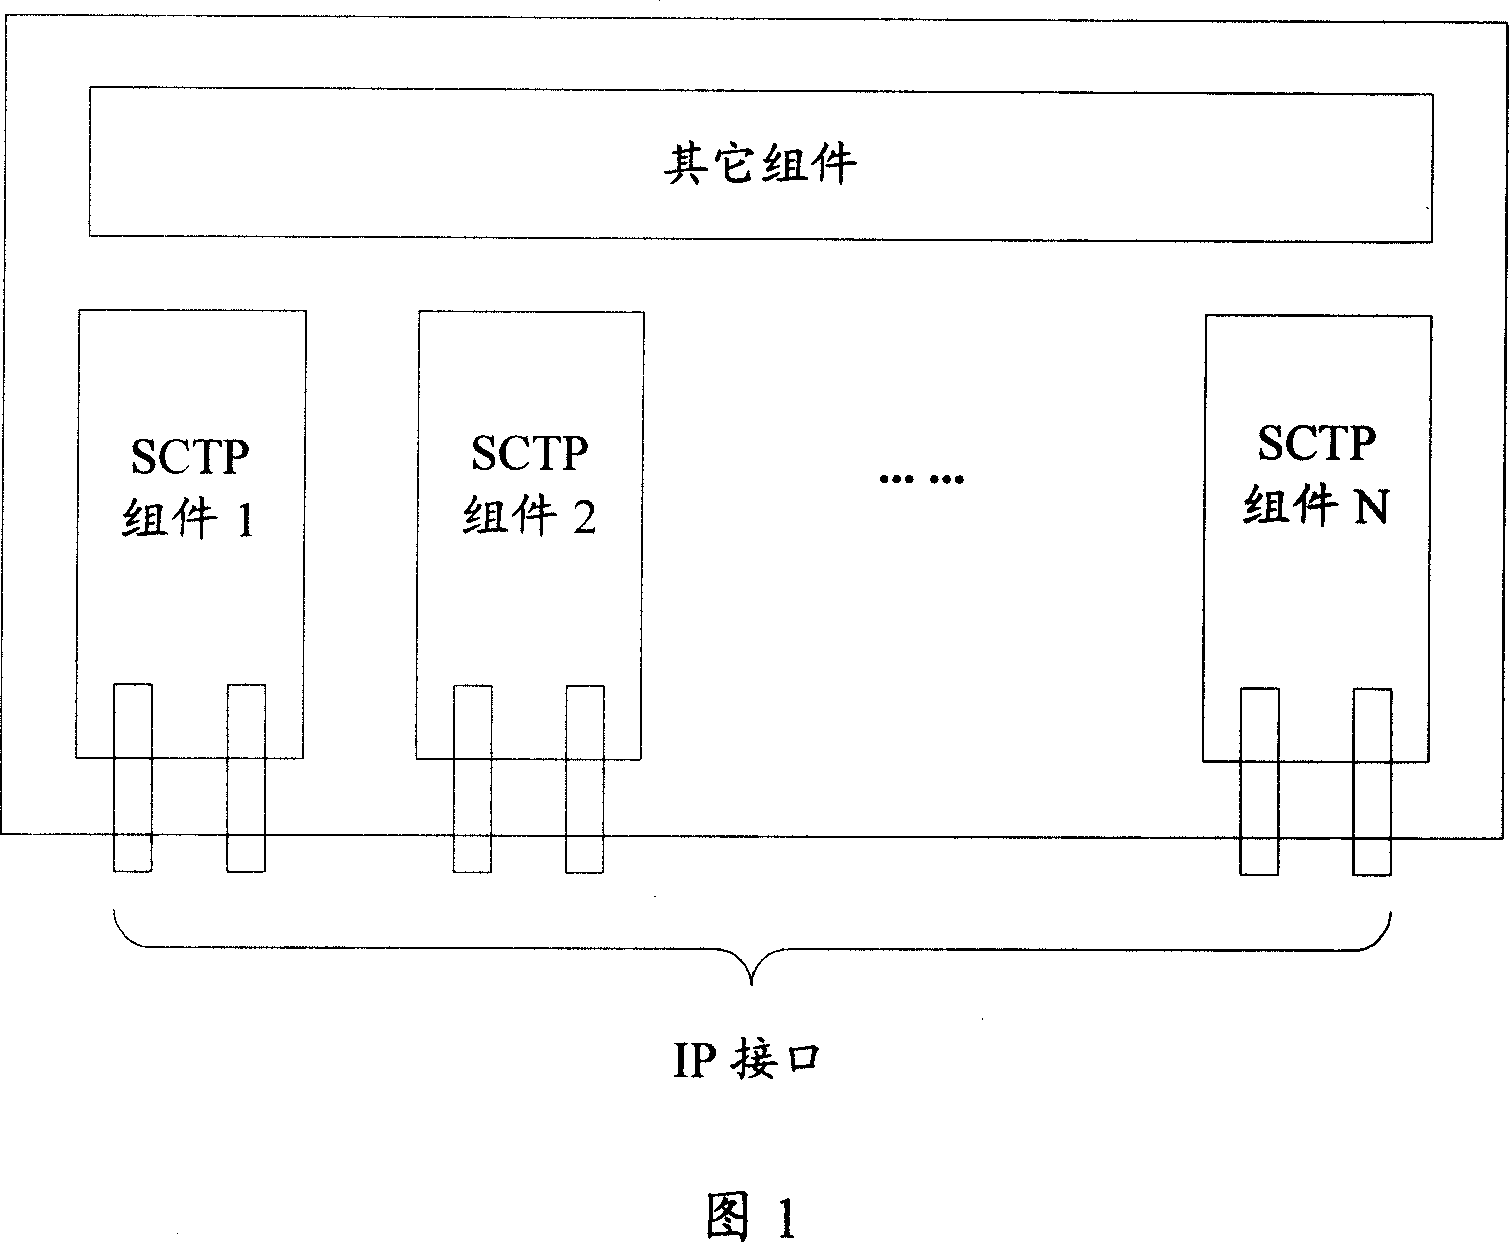 A system and method for realizing the multi-homing feature of stream control transmission protocol